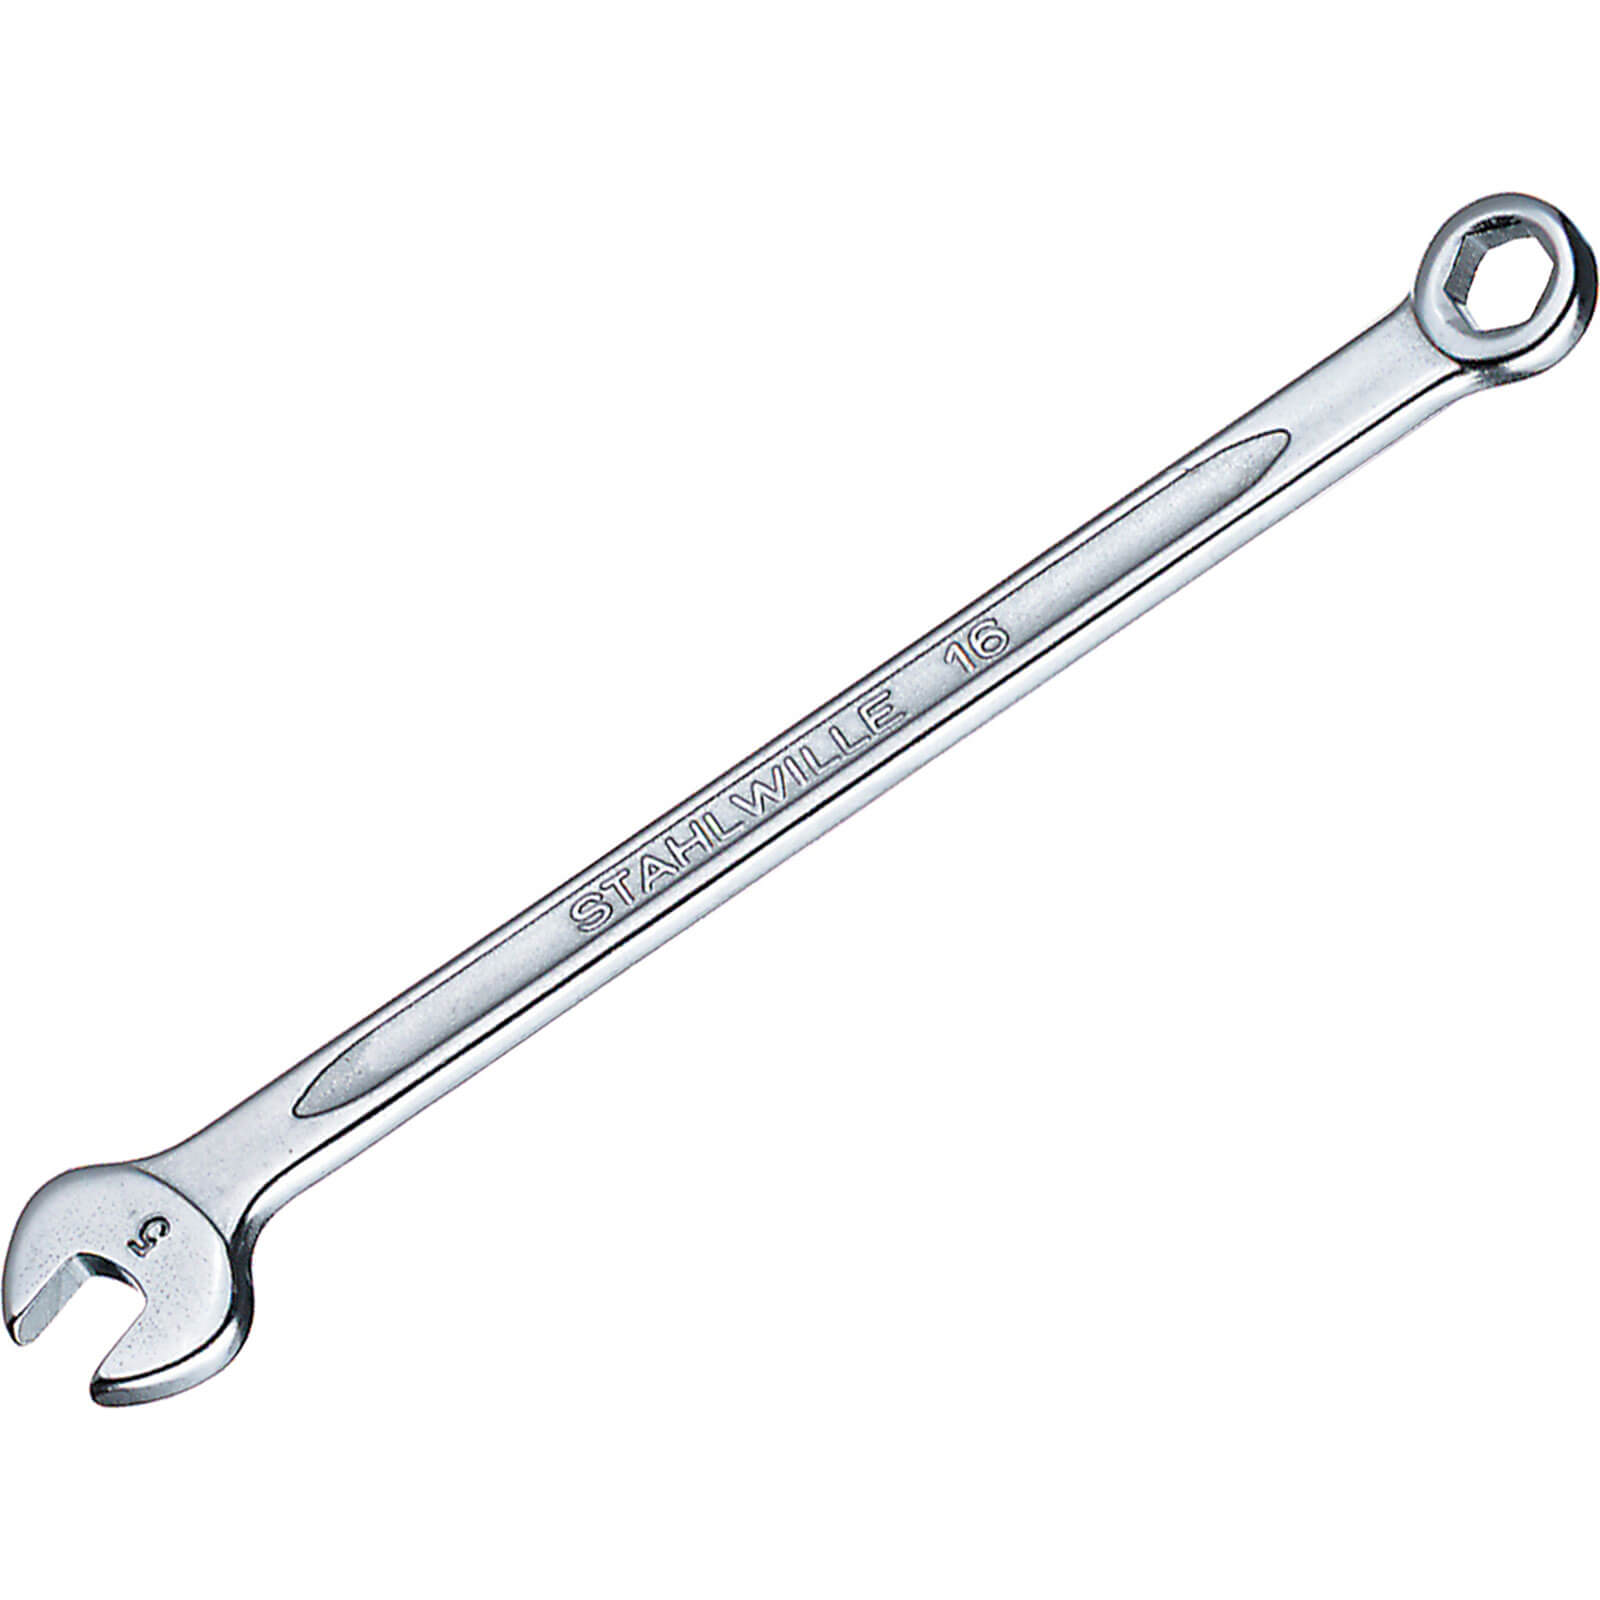 Image of Stahlwille 16 Series Midget Combination Spanner Metric 5mm